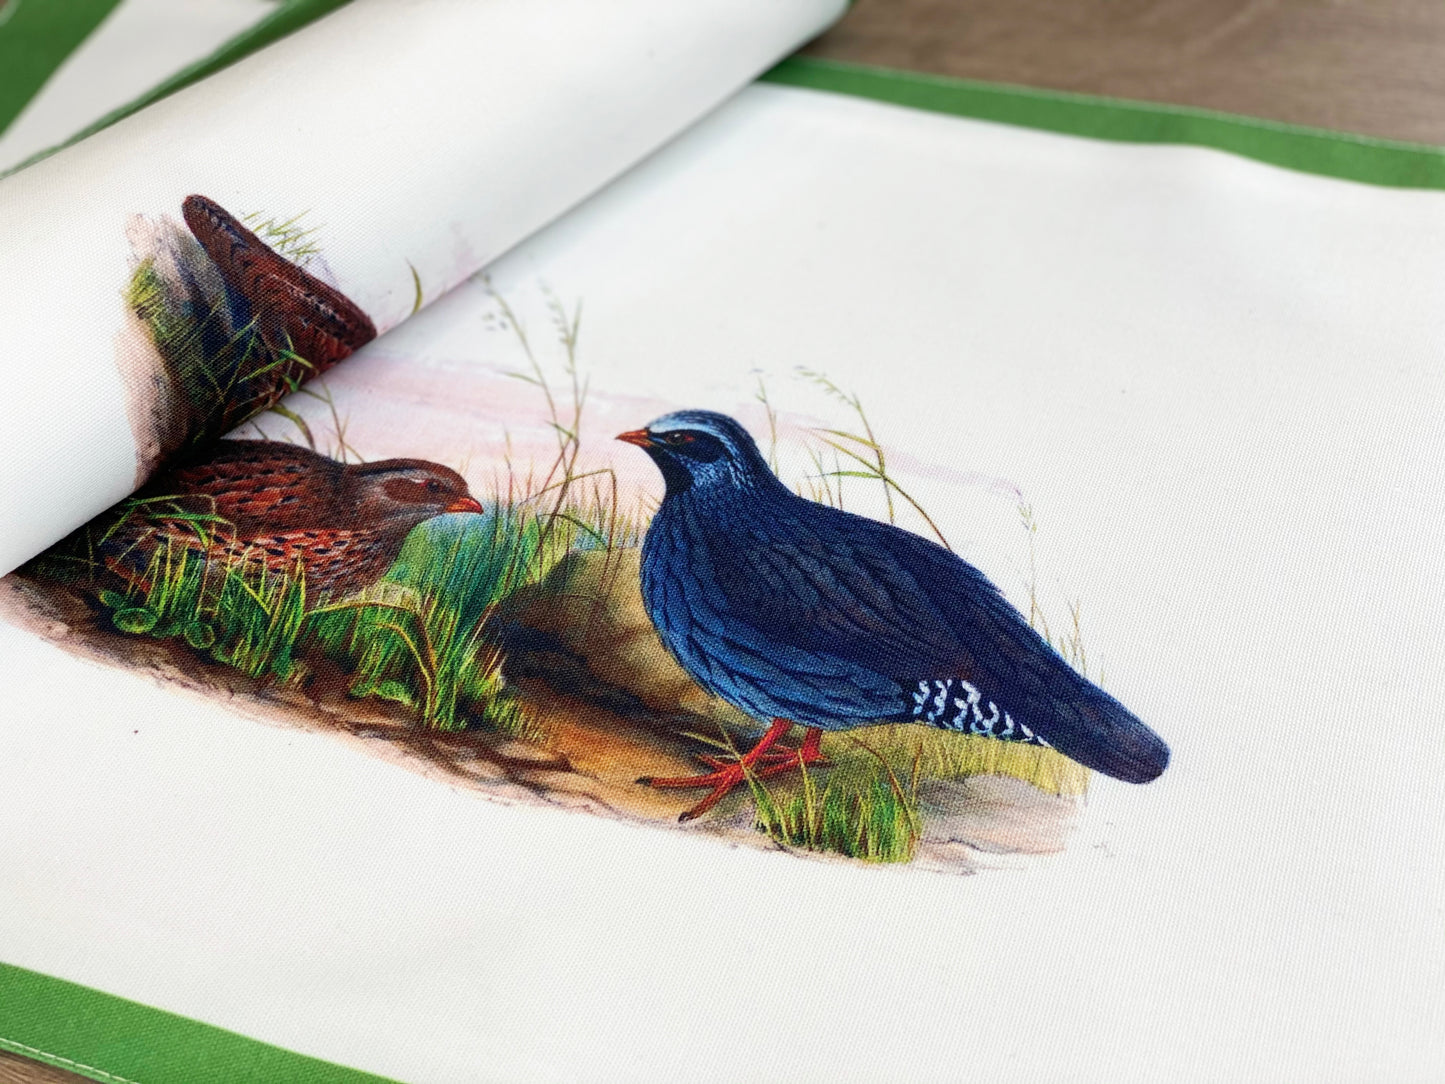 Set of 4 Decorative Machine washable Cotton Placemat, blue and brown wild birds in a green Field, Washable Placemat for fall dining table